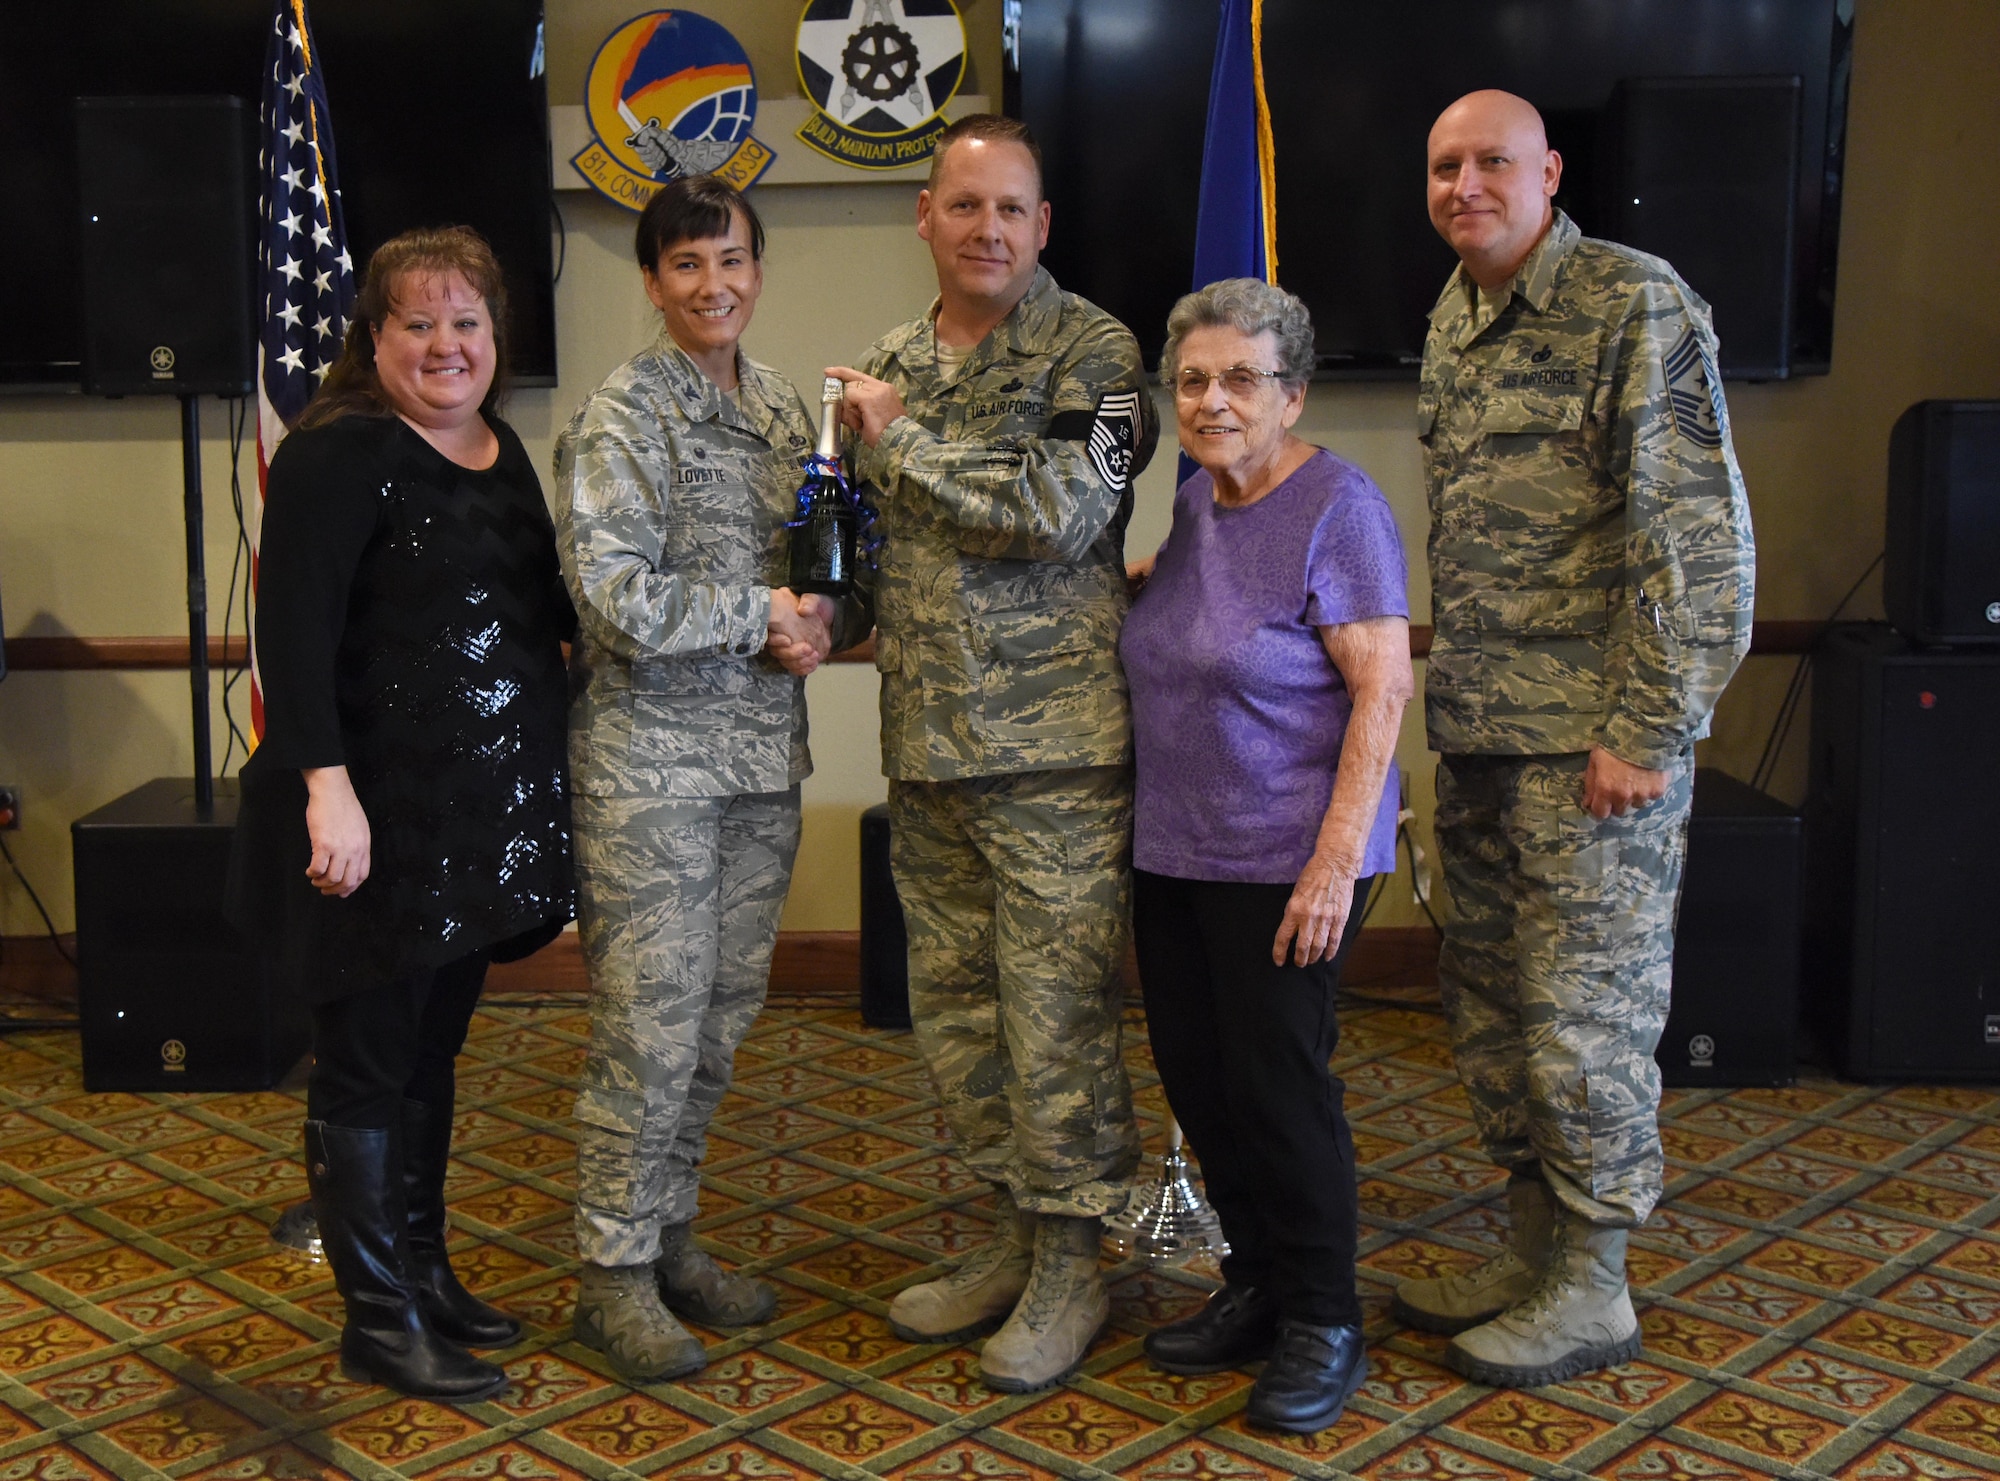 U.S. Air Force Col. Debra Lovette, 81st Training Wing commander, and Chief Master Sgt. David Pizzuto, 81st TRW command chief, present Senior Master Sgt. Michael Sterling, 81st Communications Squadron superintendent, and his family with a memento for his promotion to the rank of chief master sergeant at Keesler Air Force Base, Mississippi, Dec. 6, 2018. Five senior master sgts. at Keesler were selected for promotion. (U.S. Air Force photo by Kemberly Groue)